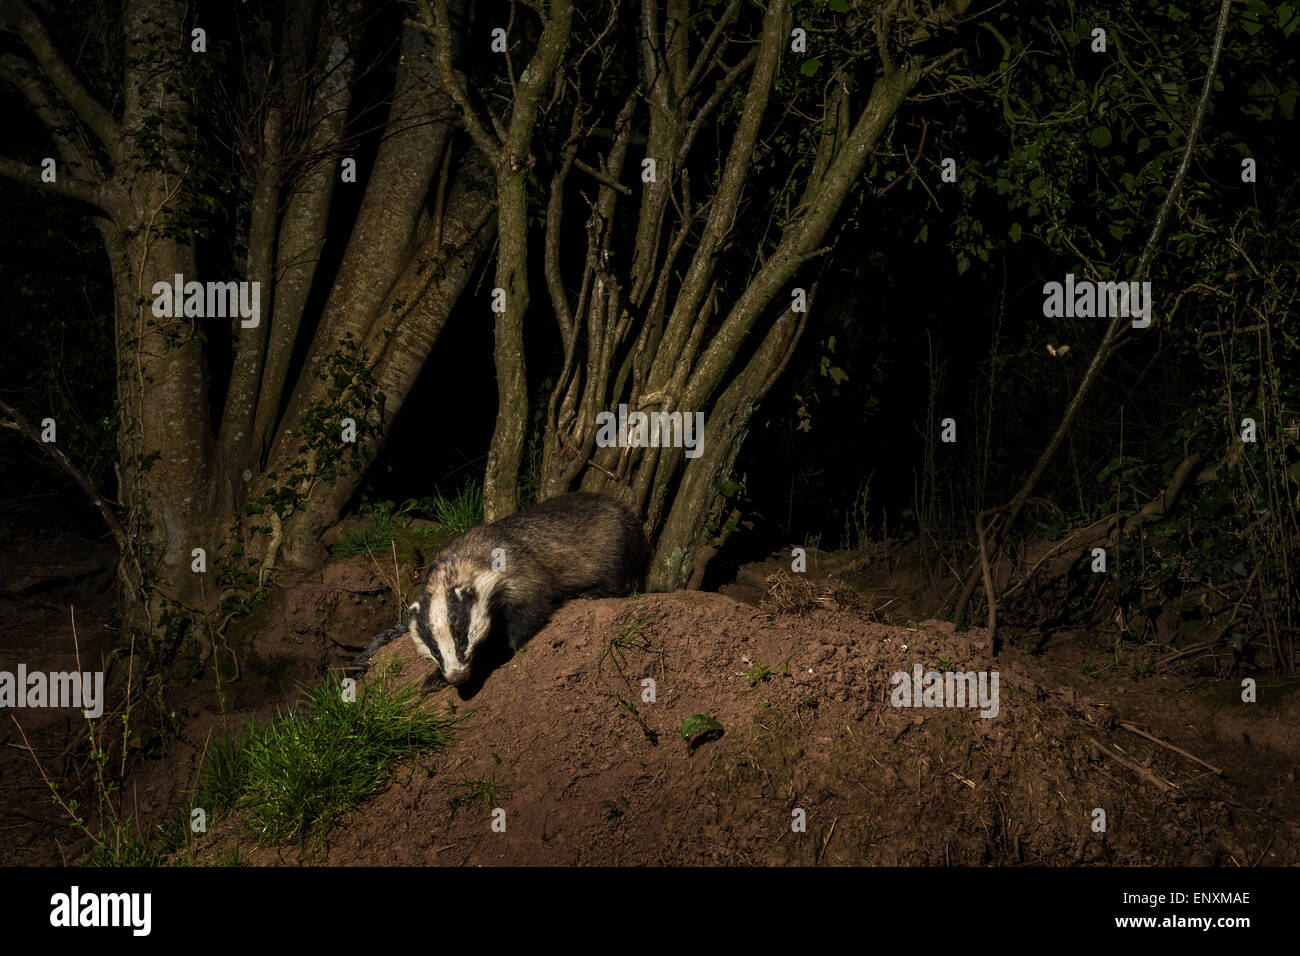 Badger (Meles melese) emerges from it's sett at night taken with camera trap and remote flash with a Moth in flight Stock Photo